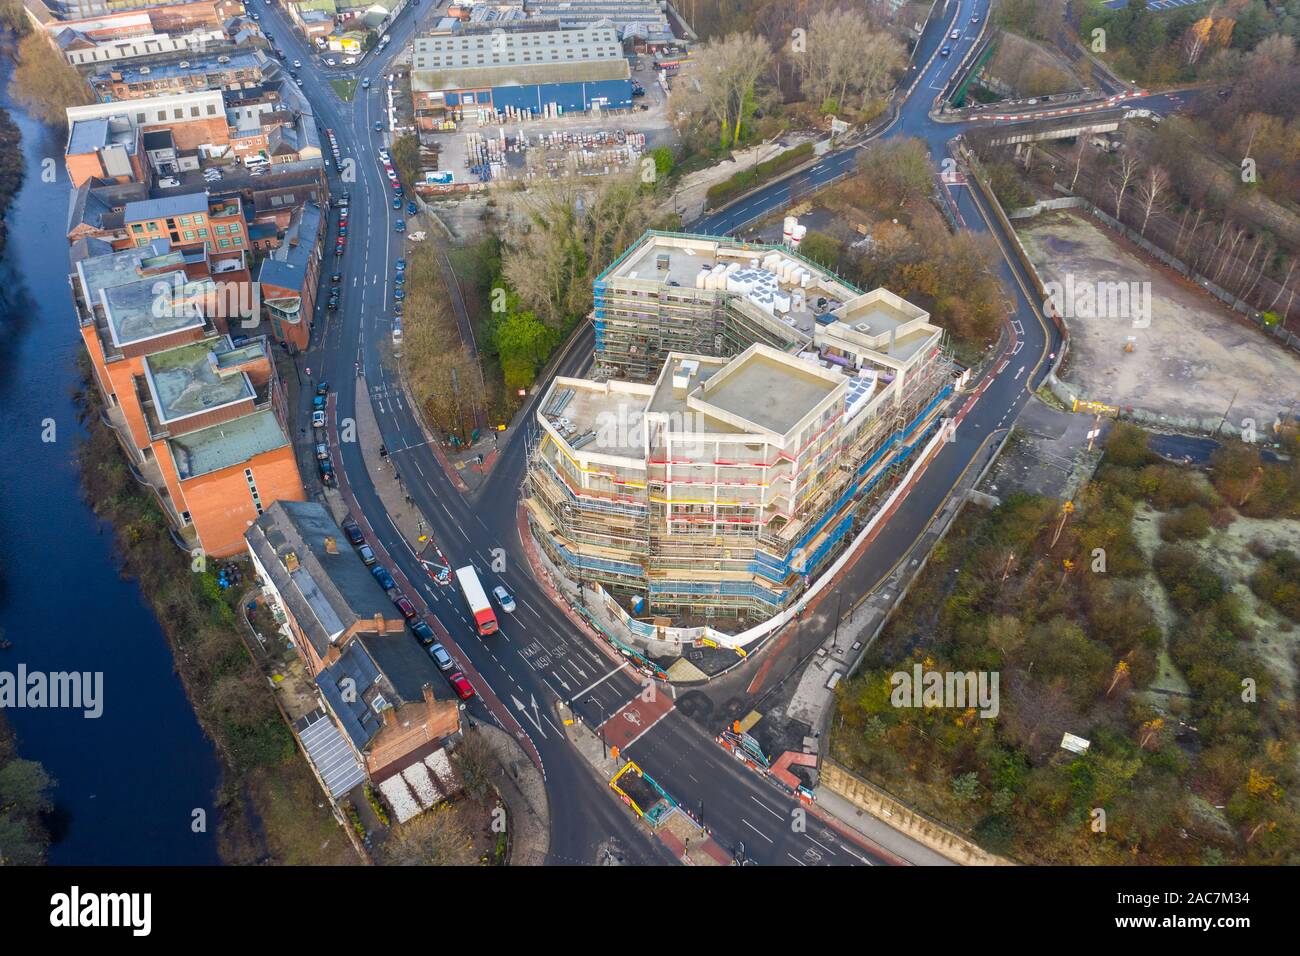 Sheffield, UK - 1st December 2019: Aerial view of new apartments being developed and built in Kelham Island, Sheffield Stock Photo